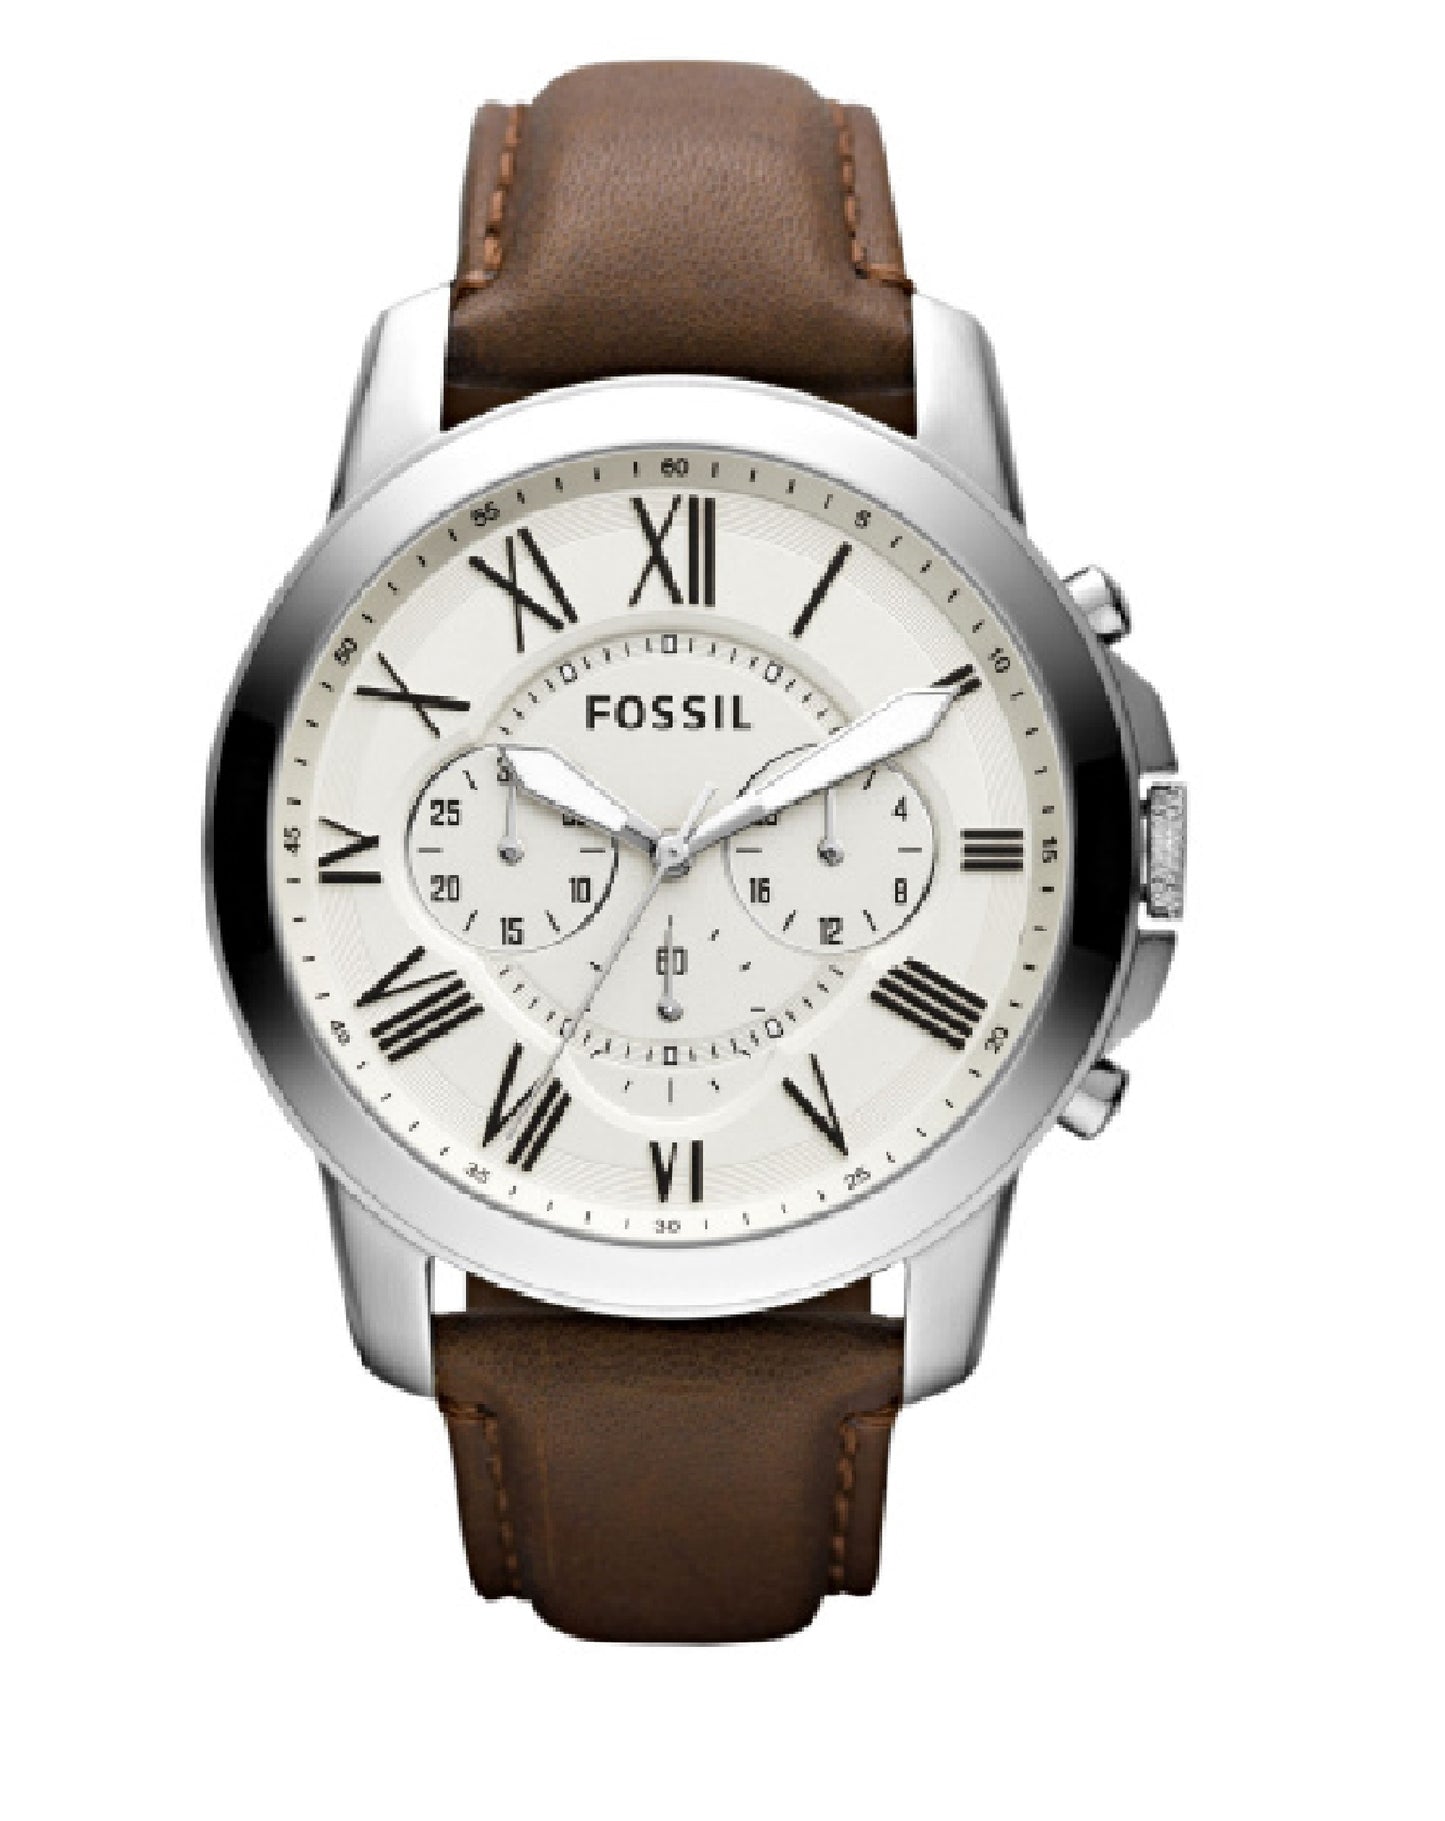 Fossil FS4735 Fossil Grant Chronograph Fossil